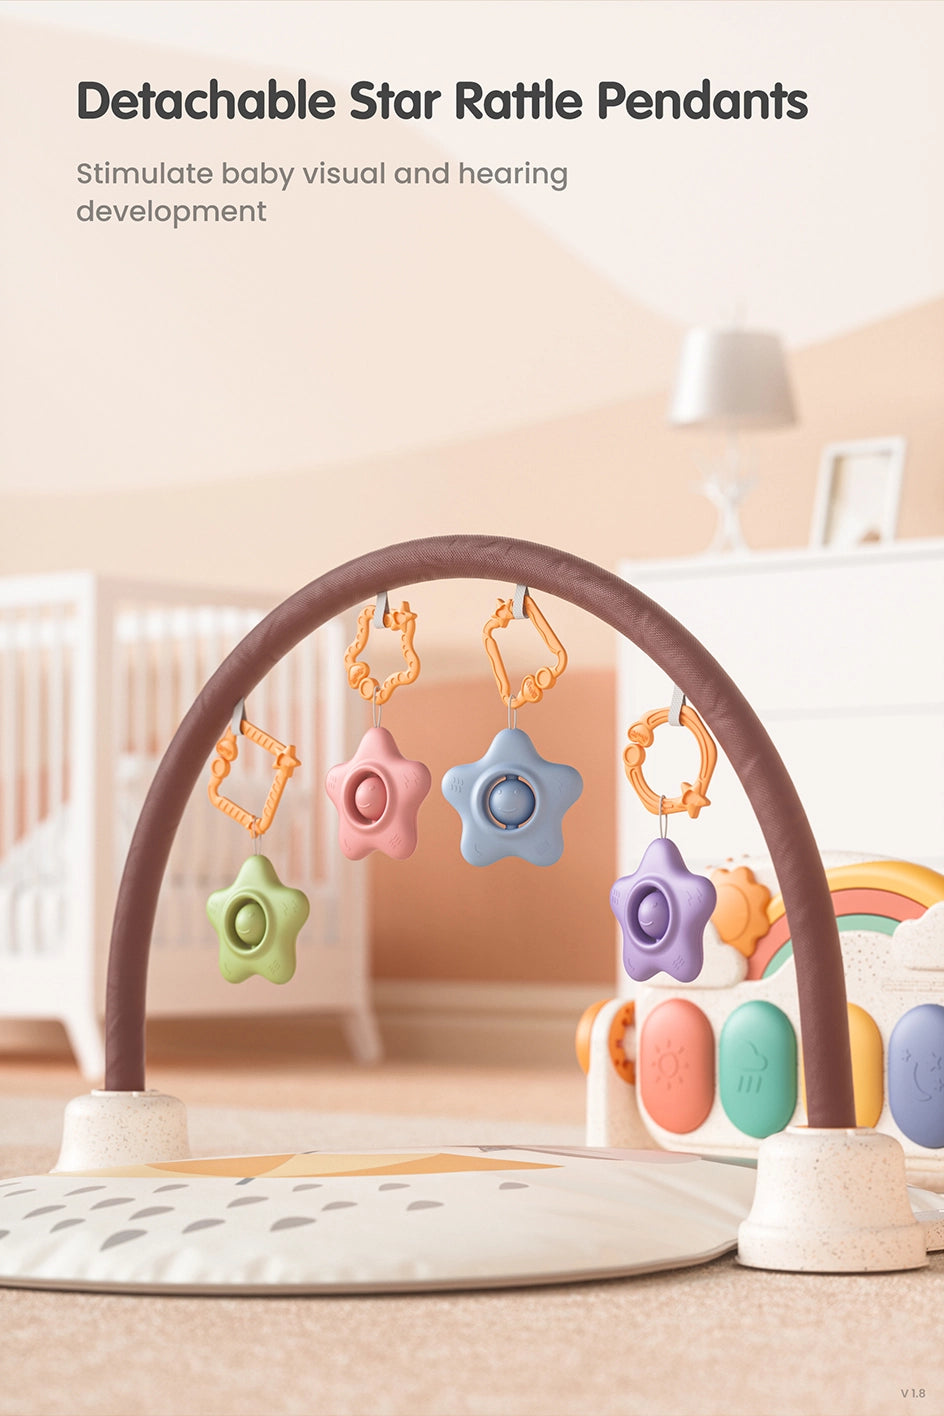 Play piano gym for infant stimulation Detachable Star Rattle Pendants